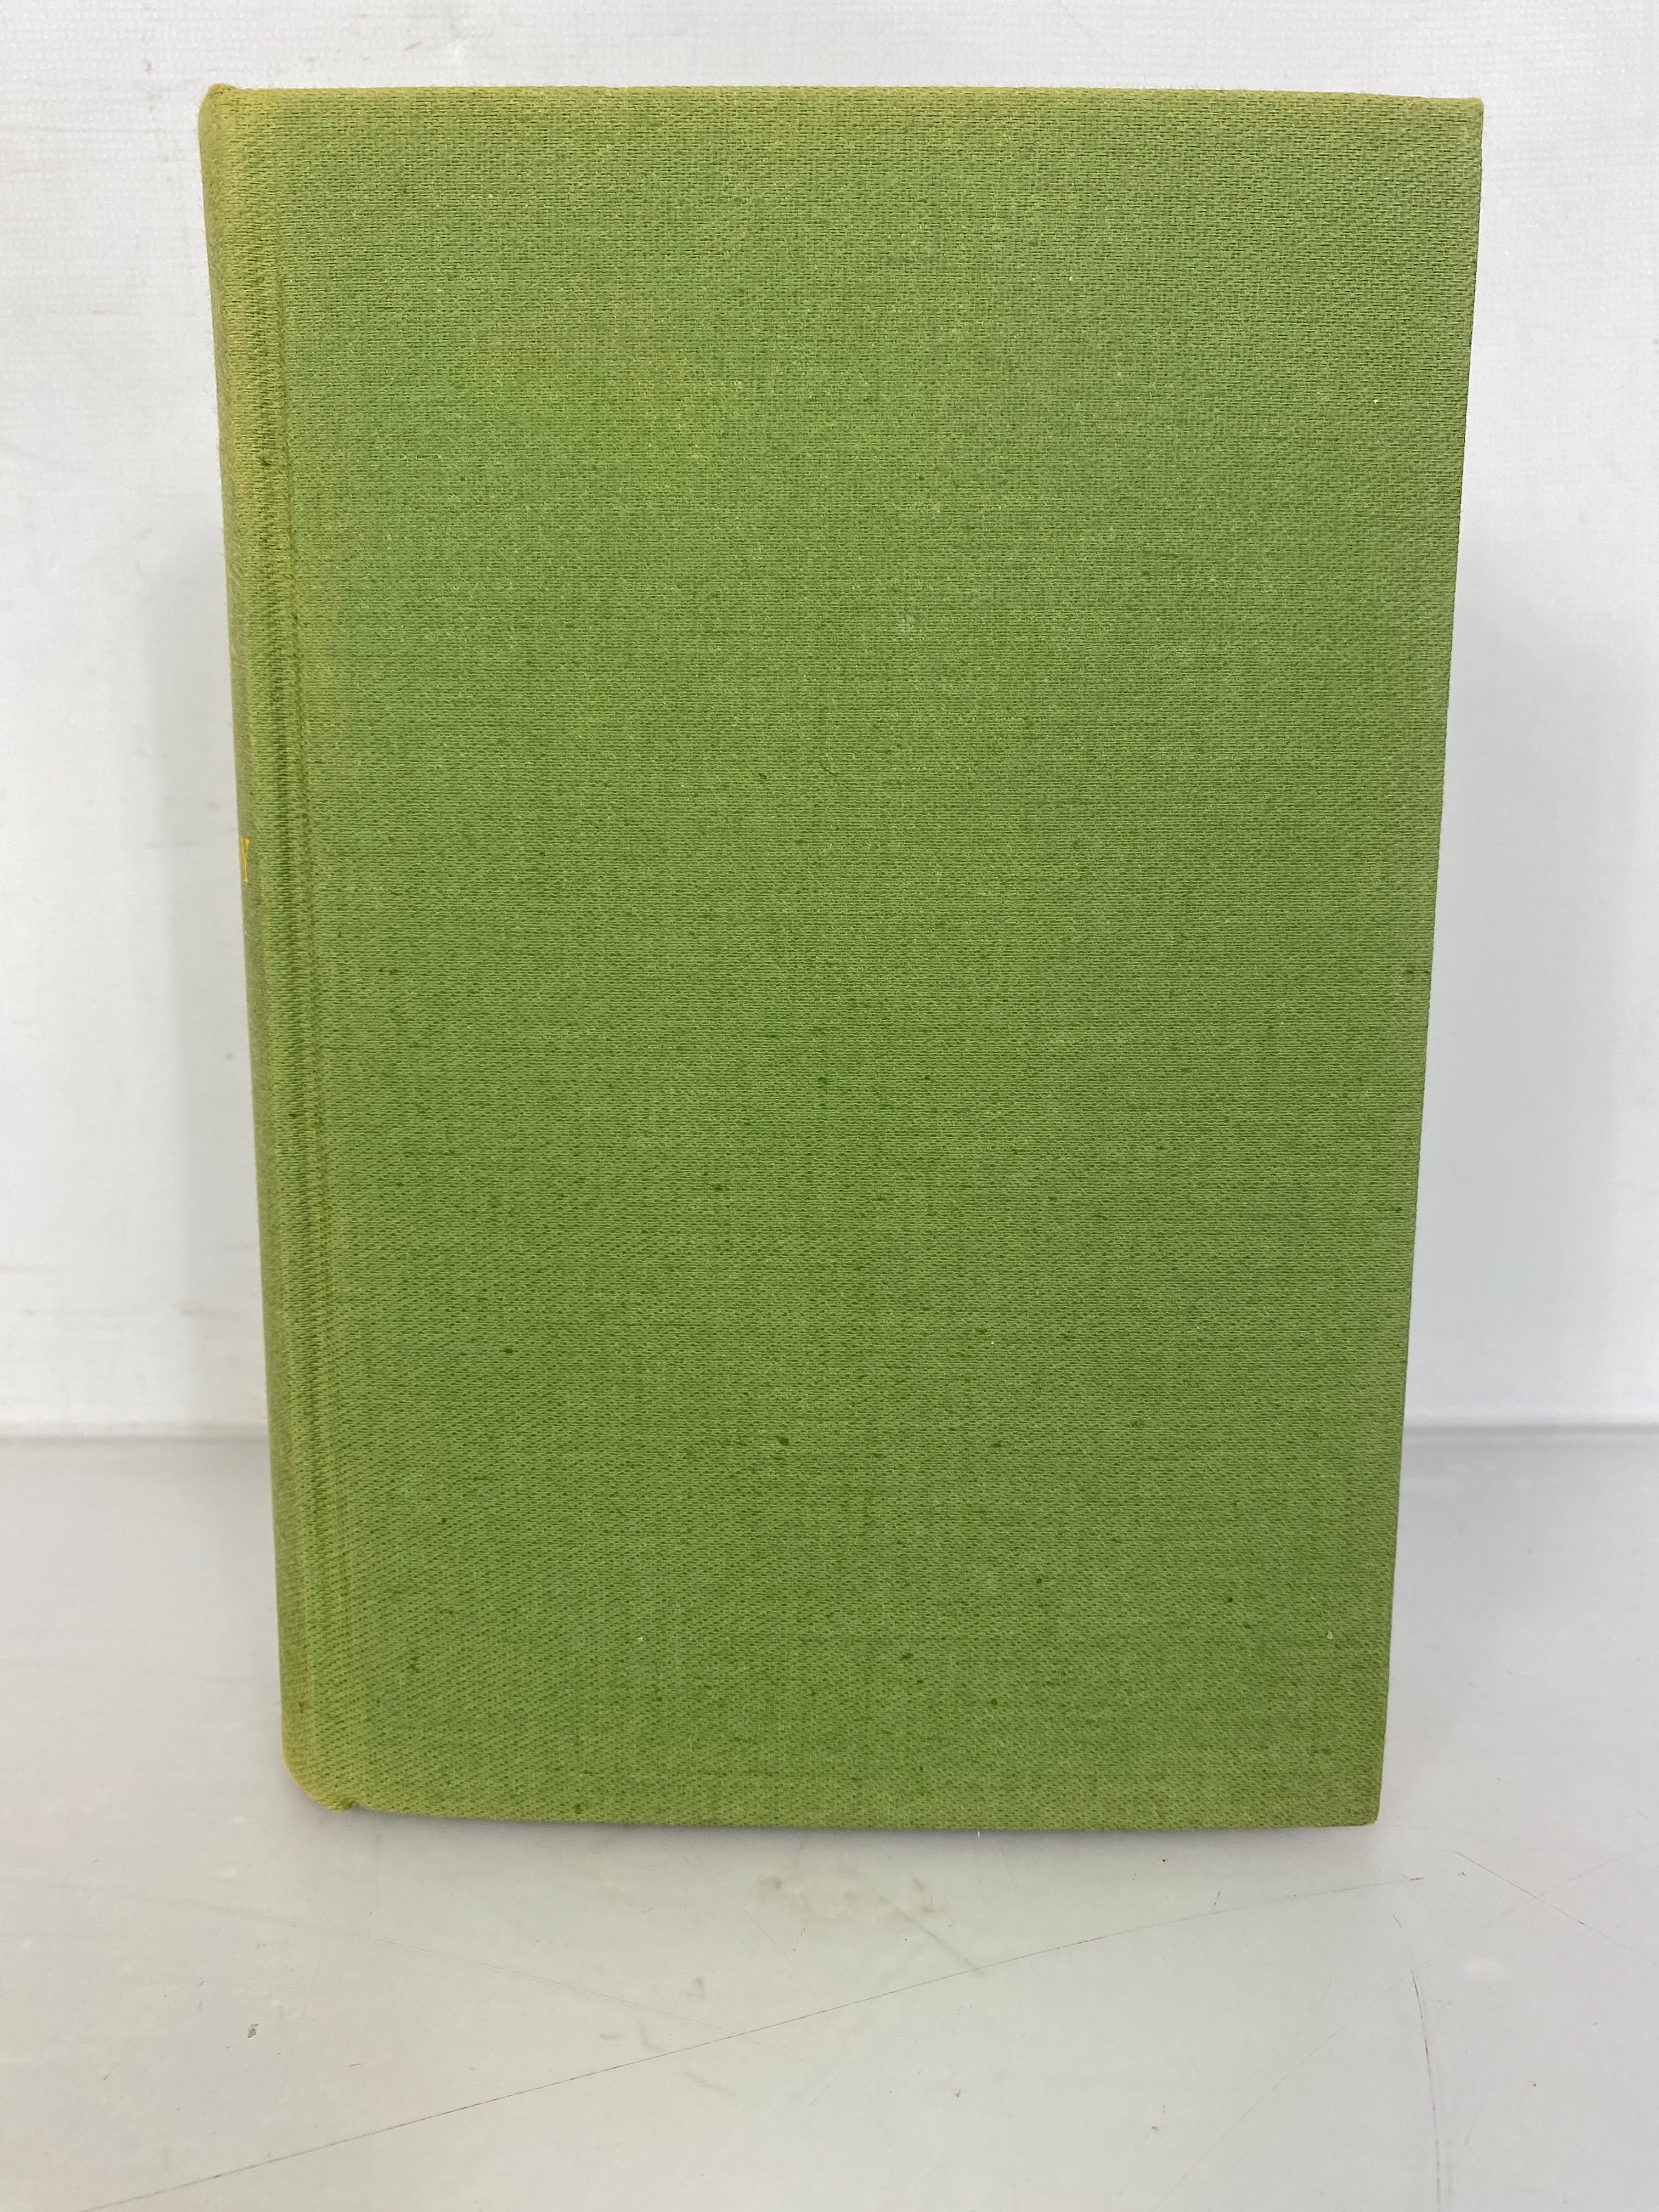 Lift Up Your Eyes The Religious Writings of Leo Tolstoy 1960 HC